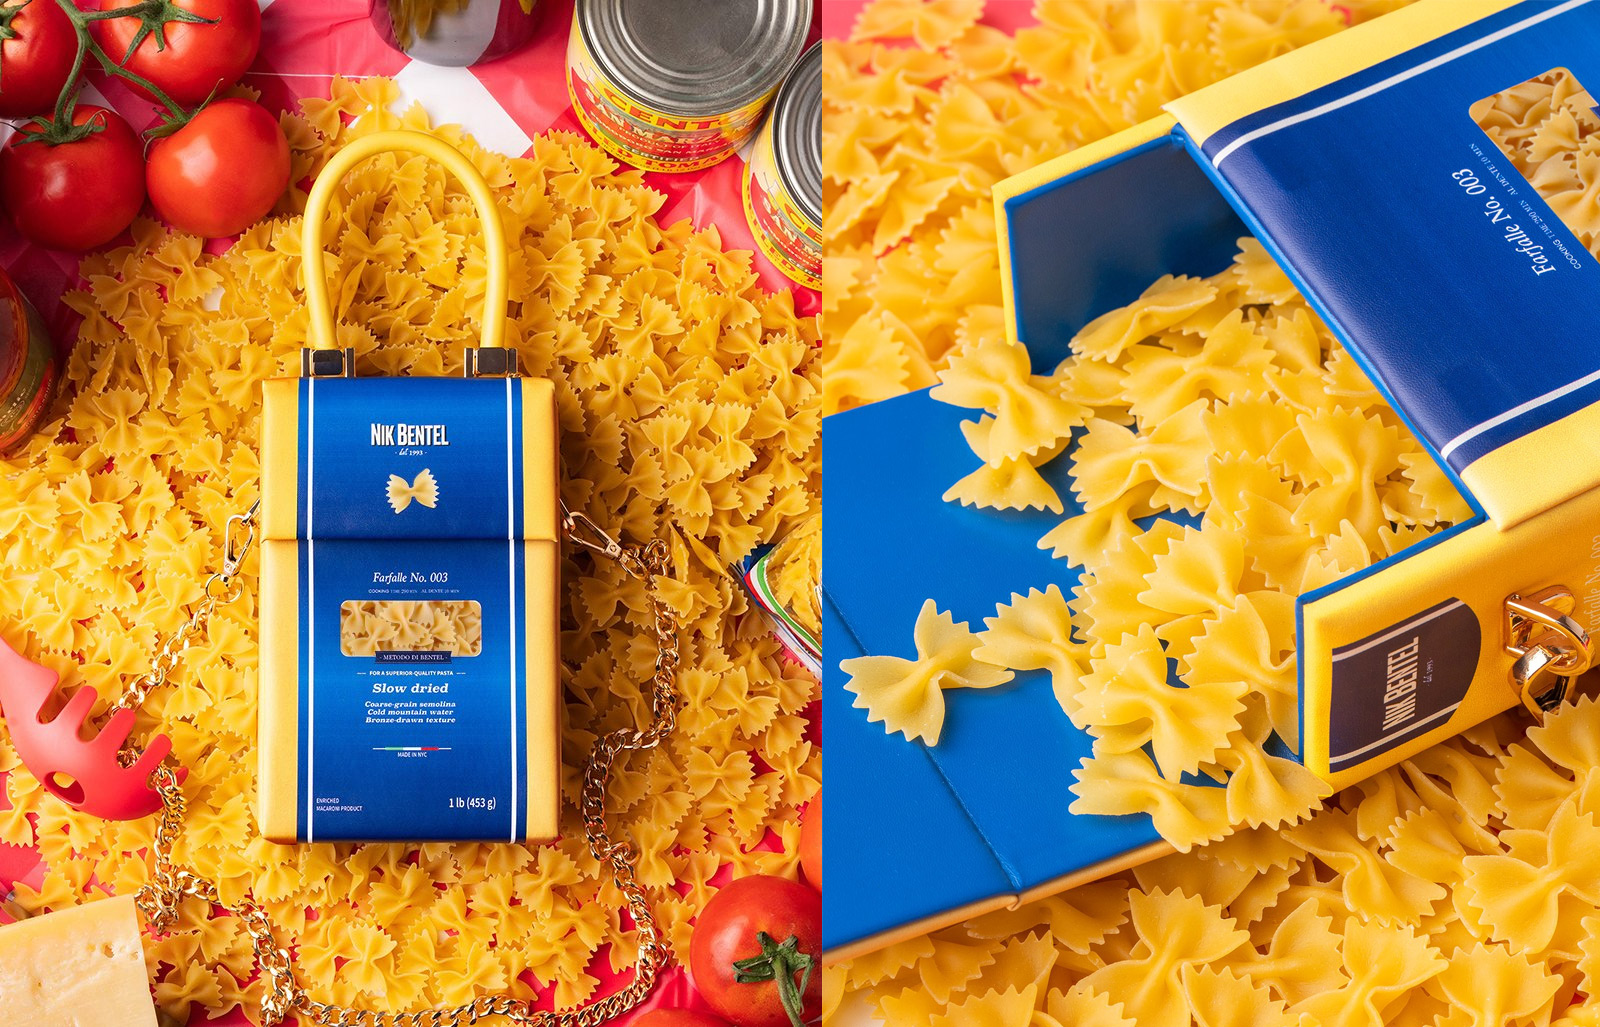 Two images of a purse shaped like a box of pasta with a handle and chain, photographed on a table covered in tagliatelle.